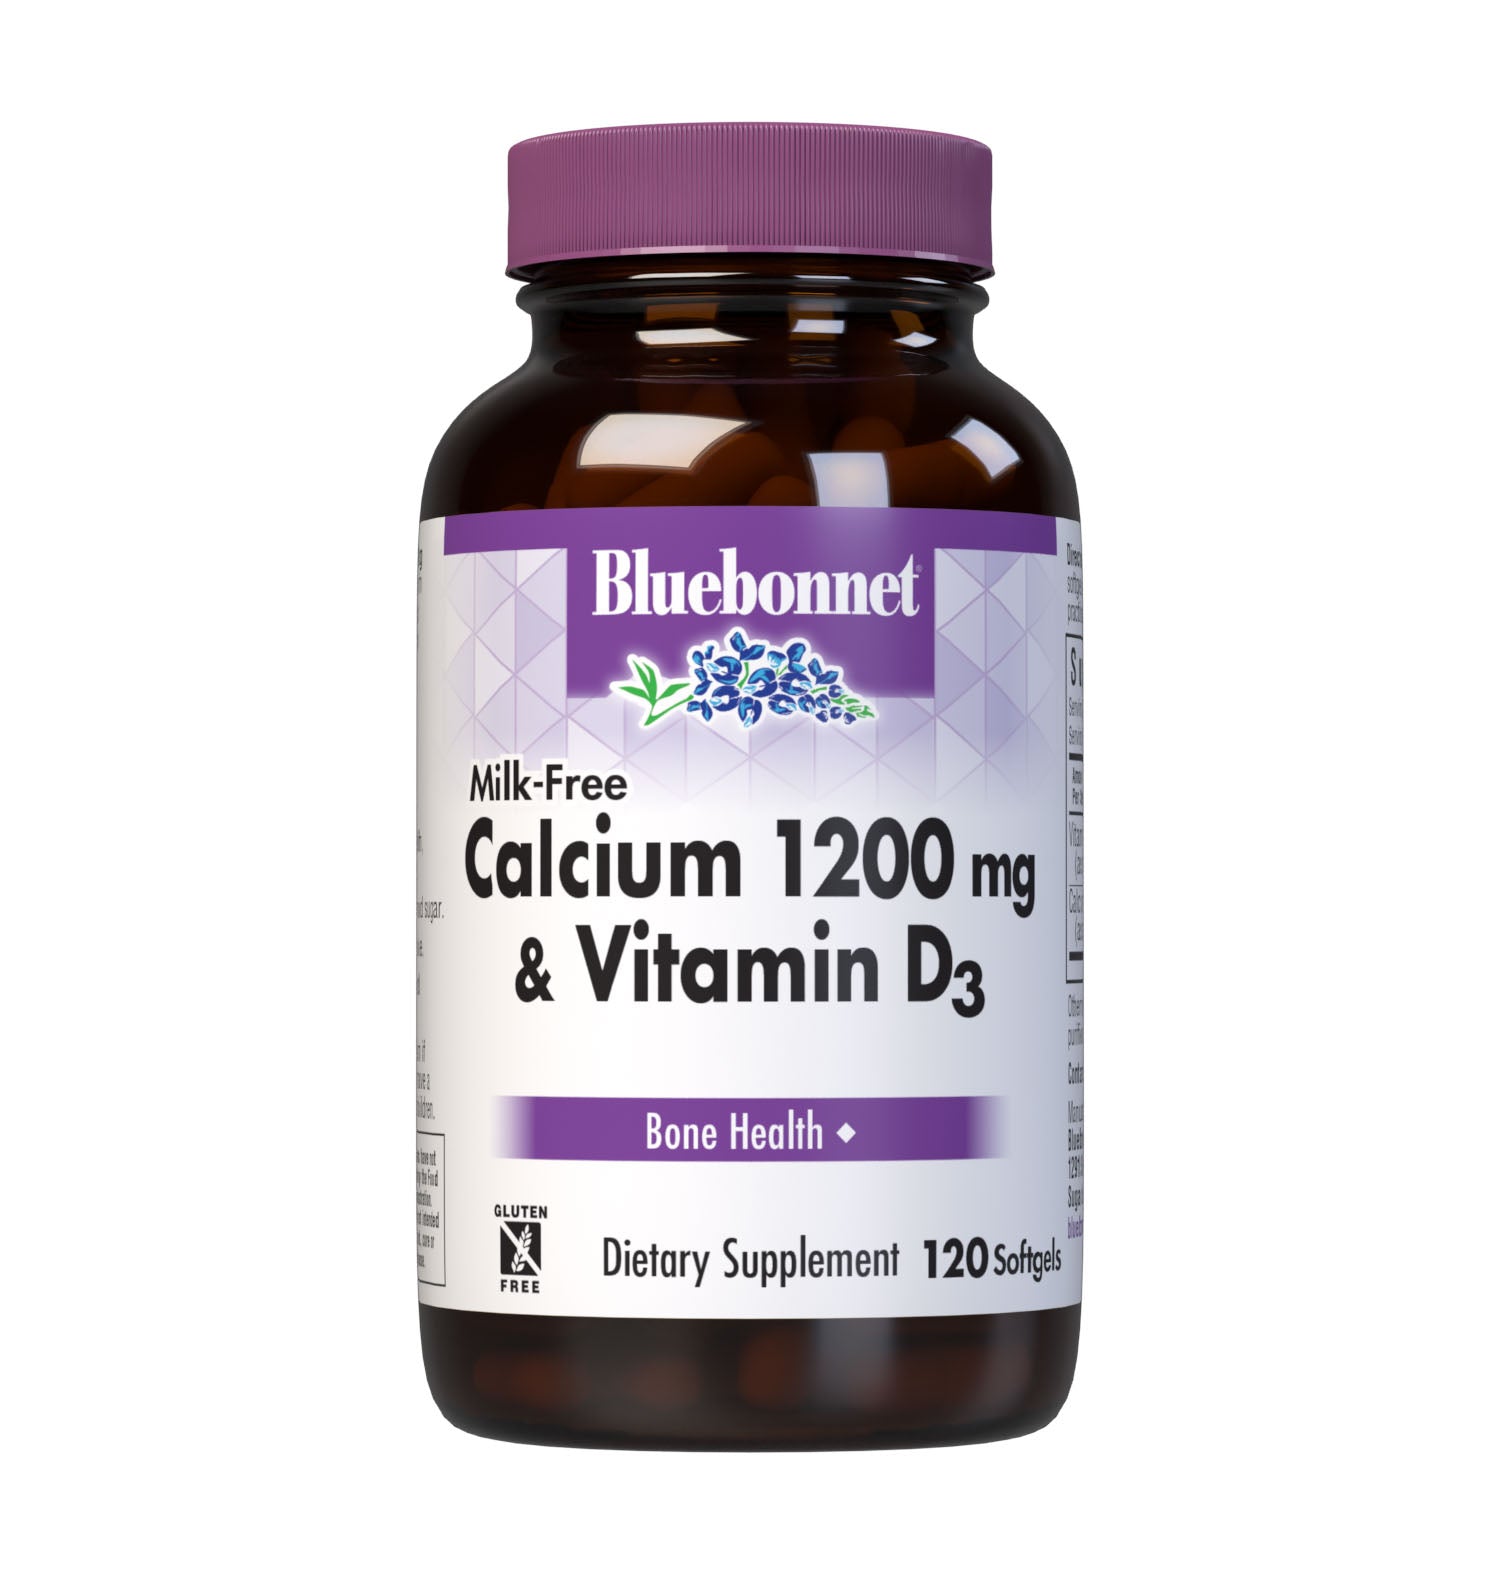 Bluebonnet’s Milk-Free Calcium 1200 mg & Vitamin D3 120 Softgels are formulated with a combination of calcium carbonate and vitamin D3 (cholecalciferol) from lanolin for strong, healthy bones.  #size_120 count